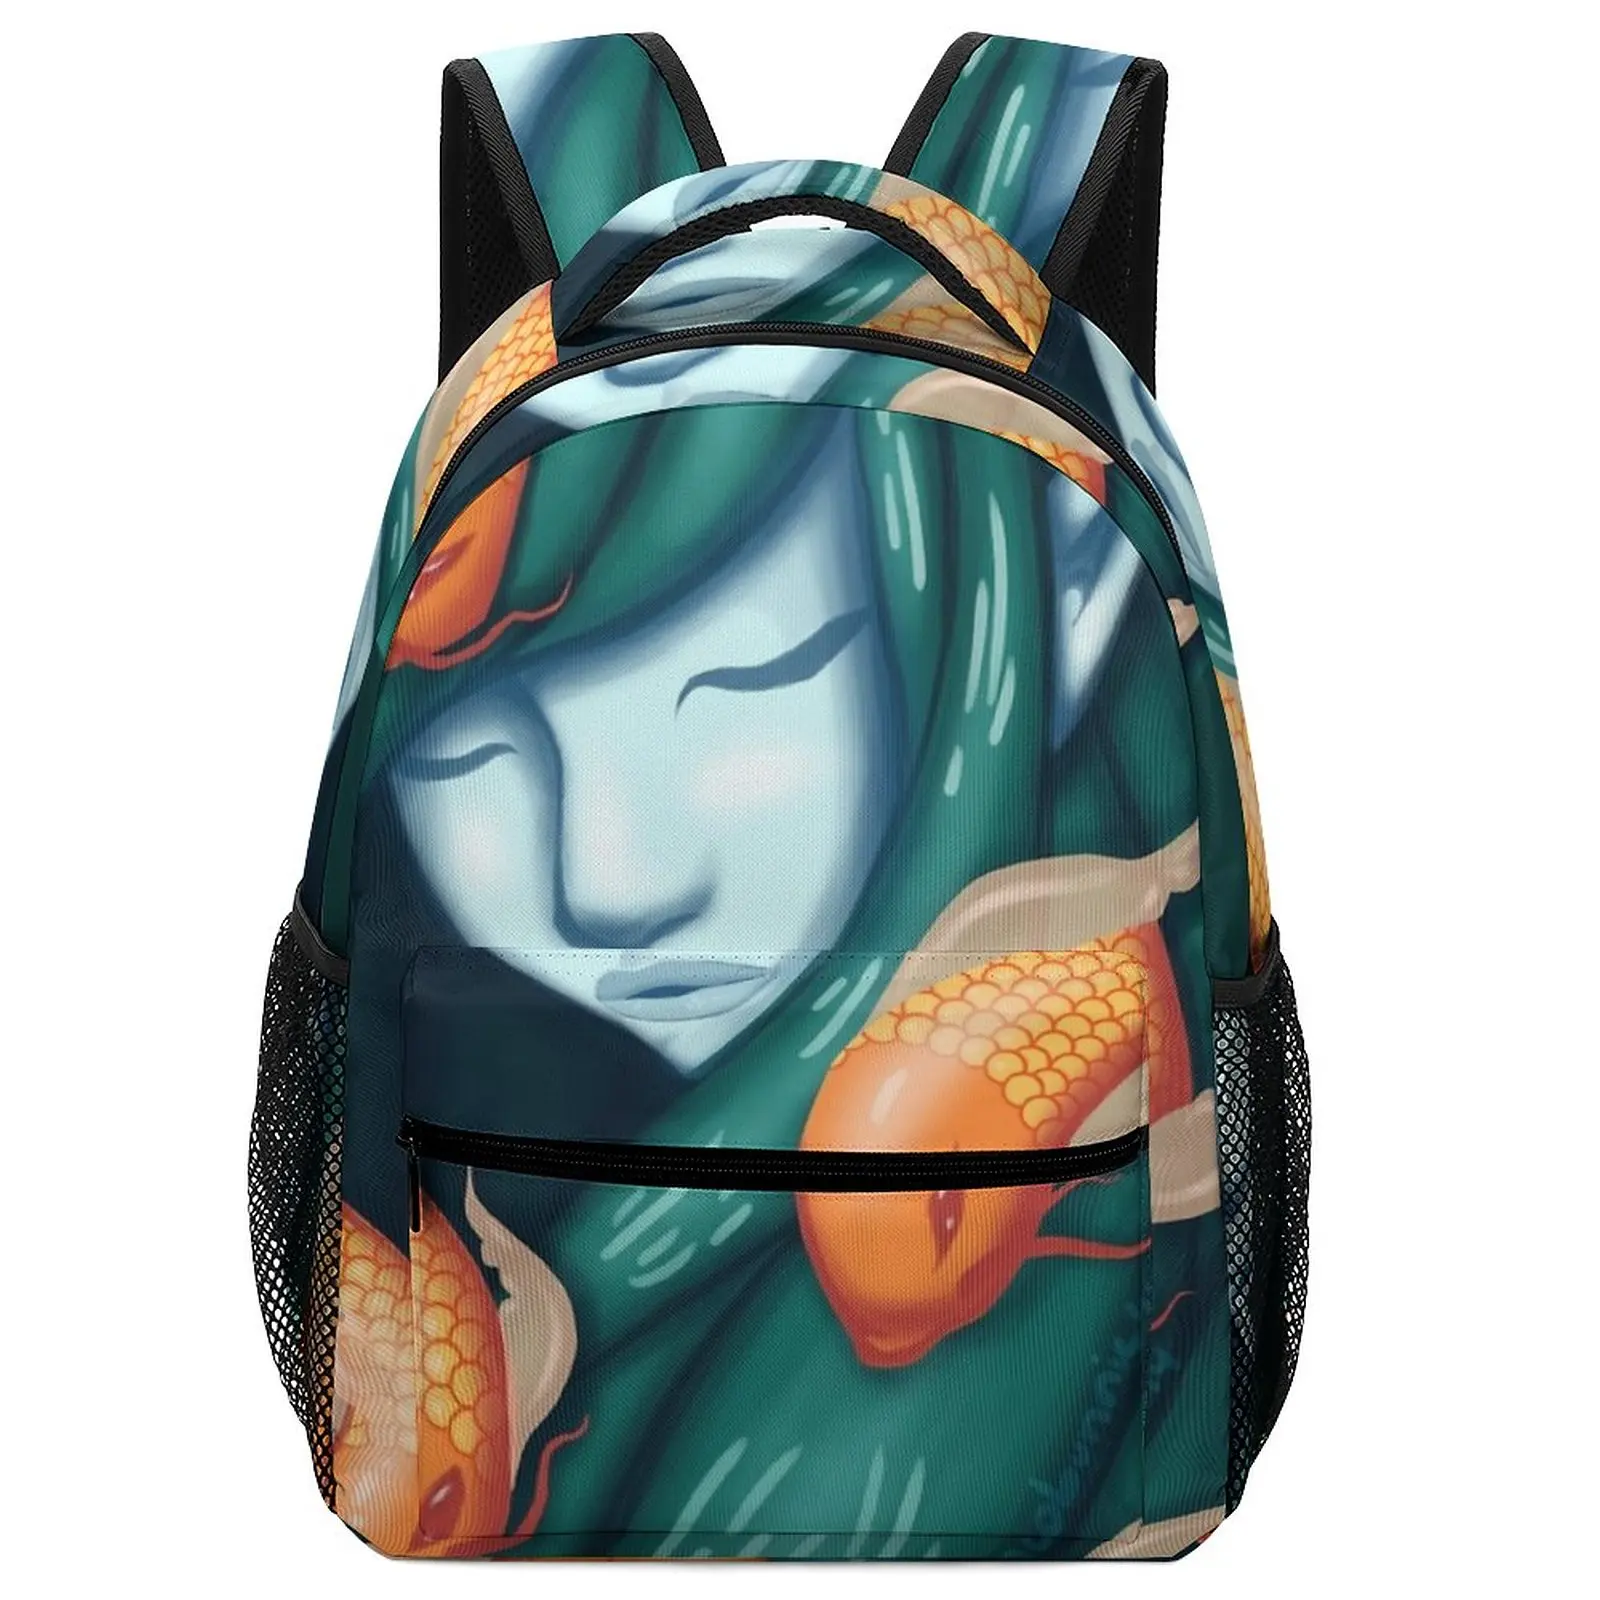 New Fashion Sea of Dreams Fun Japanese Backpack for Student Kids School Bags for Teenagers Black Backpack Fabric